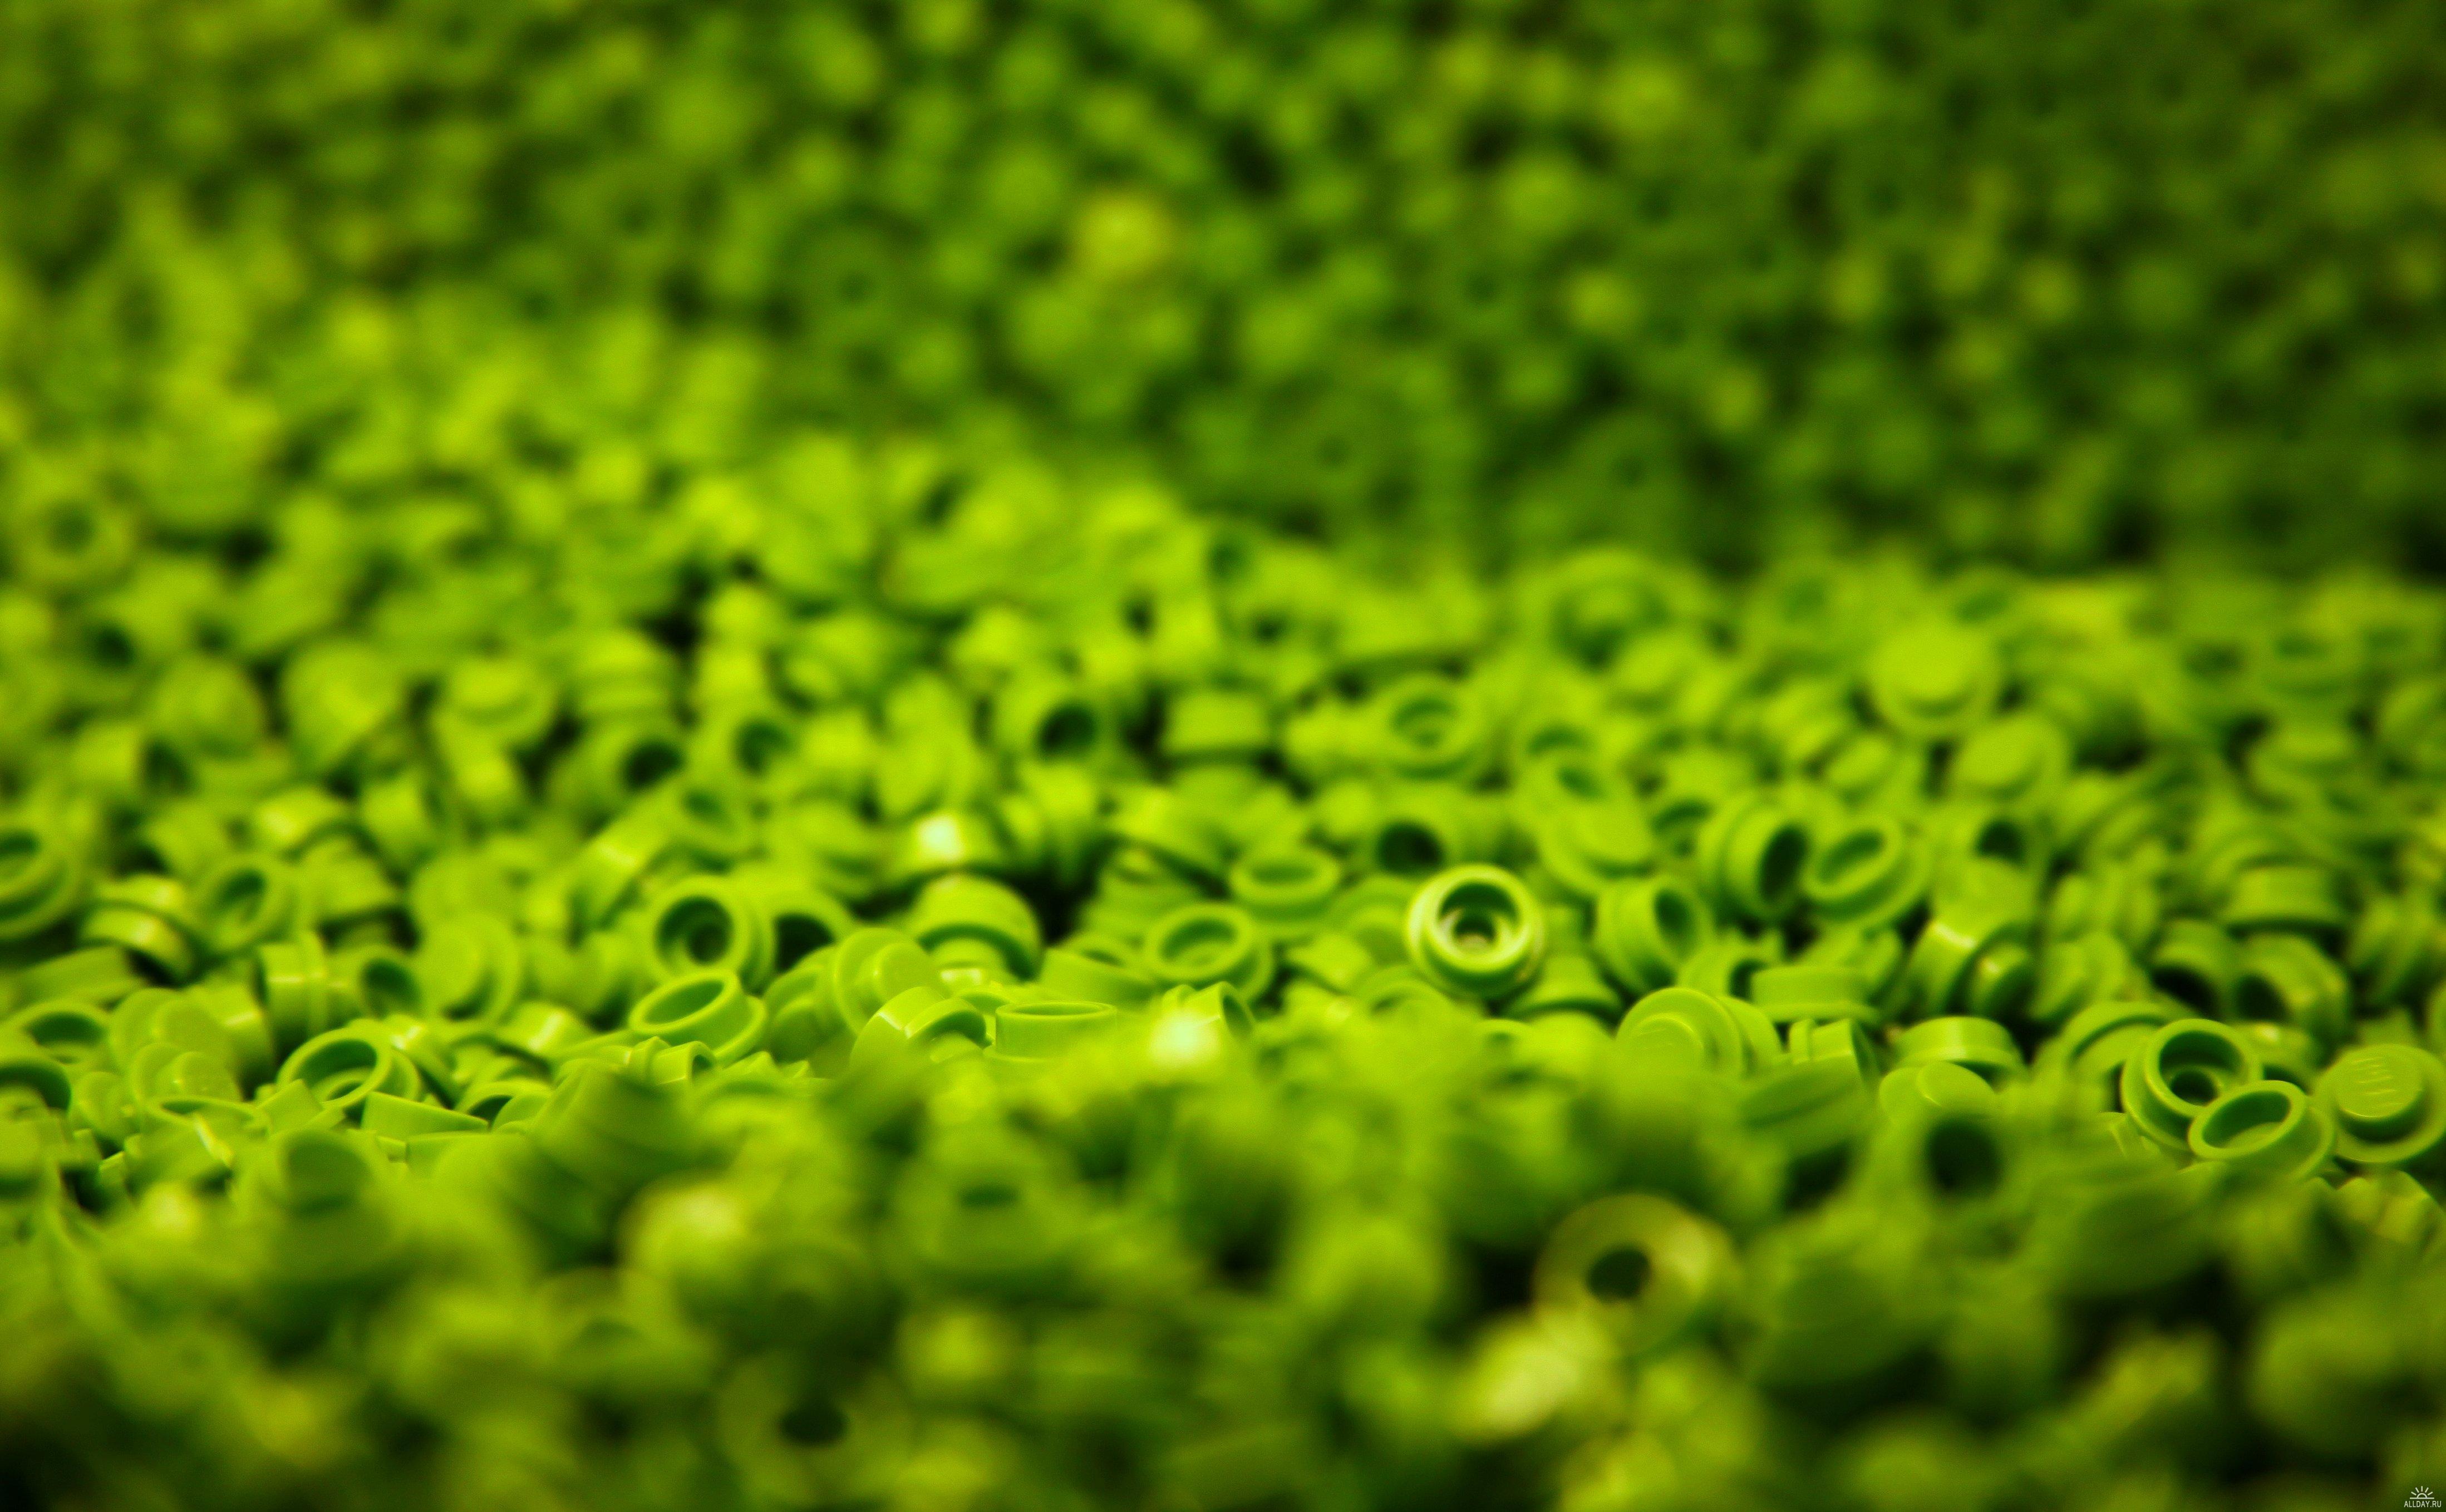 Green Parts Of Lego Wallpapers And Images Wallpapers HD Wallpapers Download Free Images Wallpaper [wallpaper981.blogspot.com]